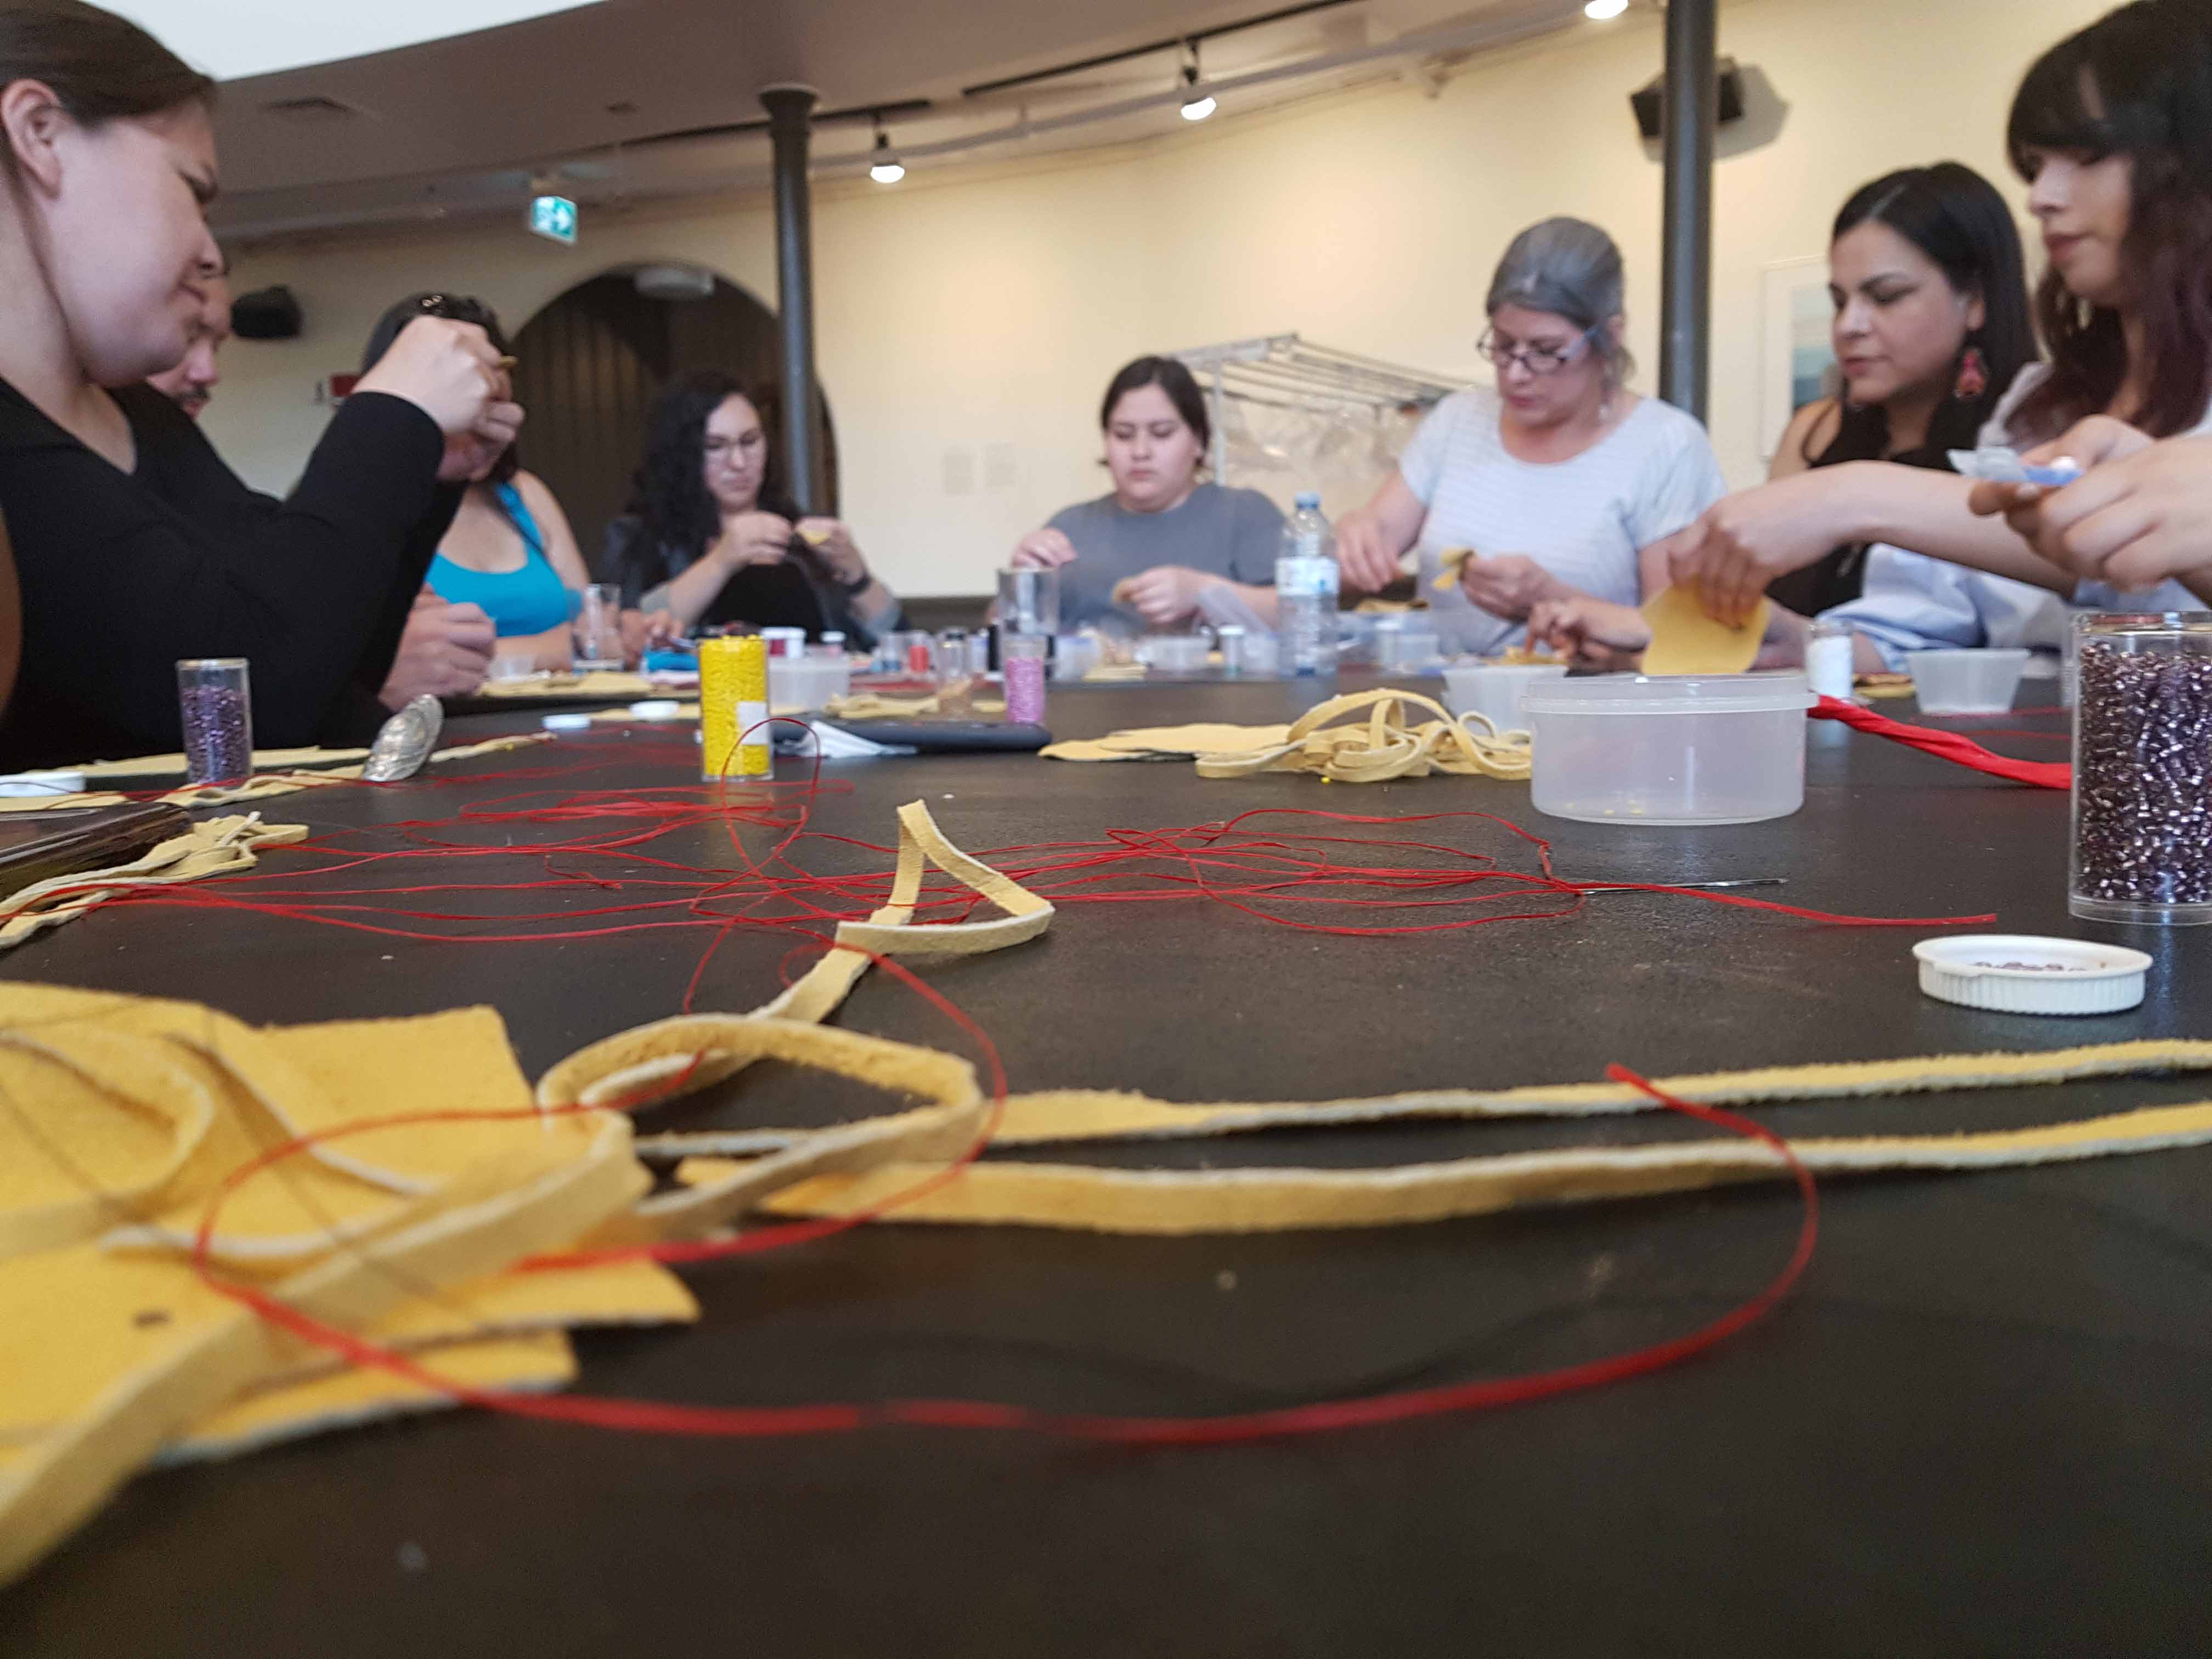 Students making moccasins